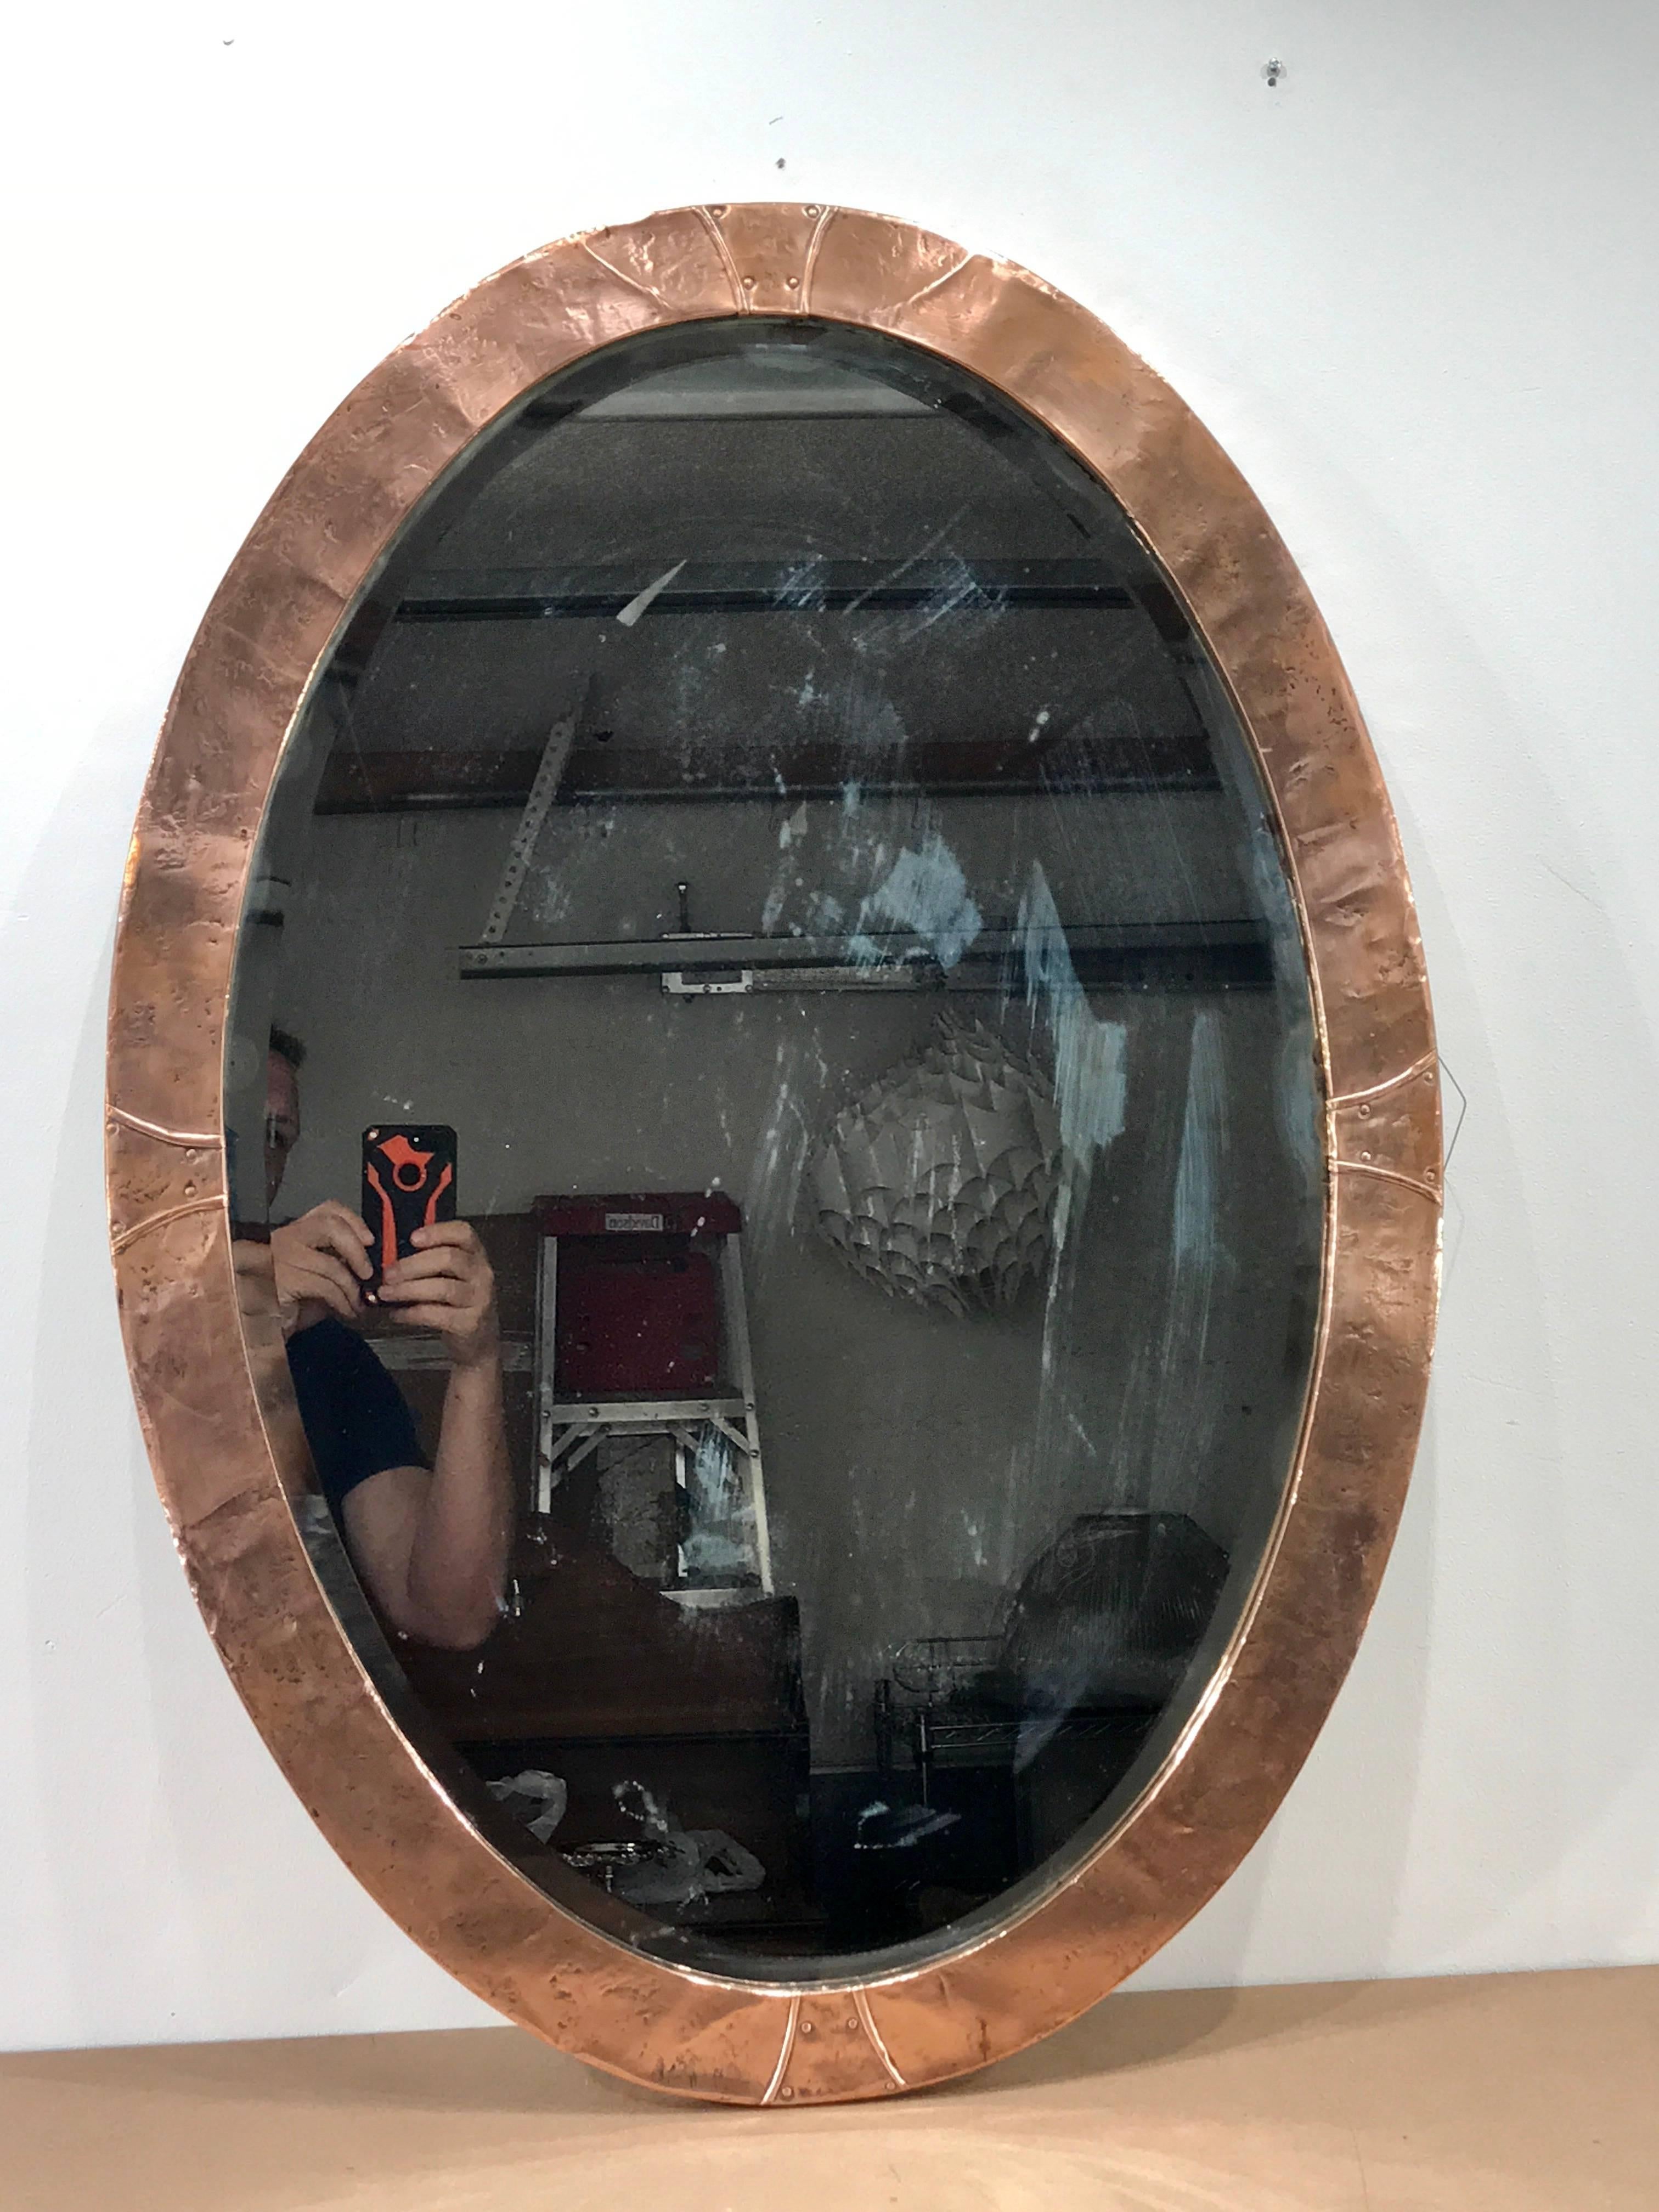 Art & Crafts hammered copper wall mirror, attributed to the Glasgow school, of oval form with hand-forged nearly seamless copper frame with inset bevelled mirror that measures 29.5